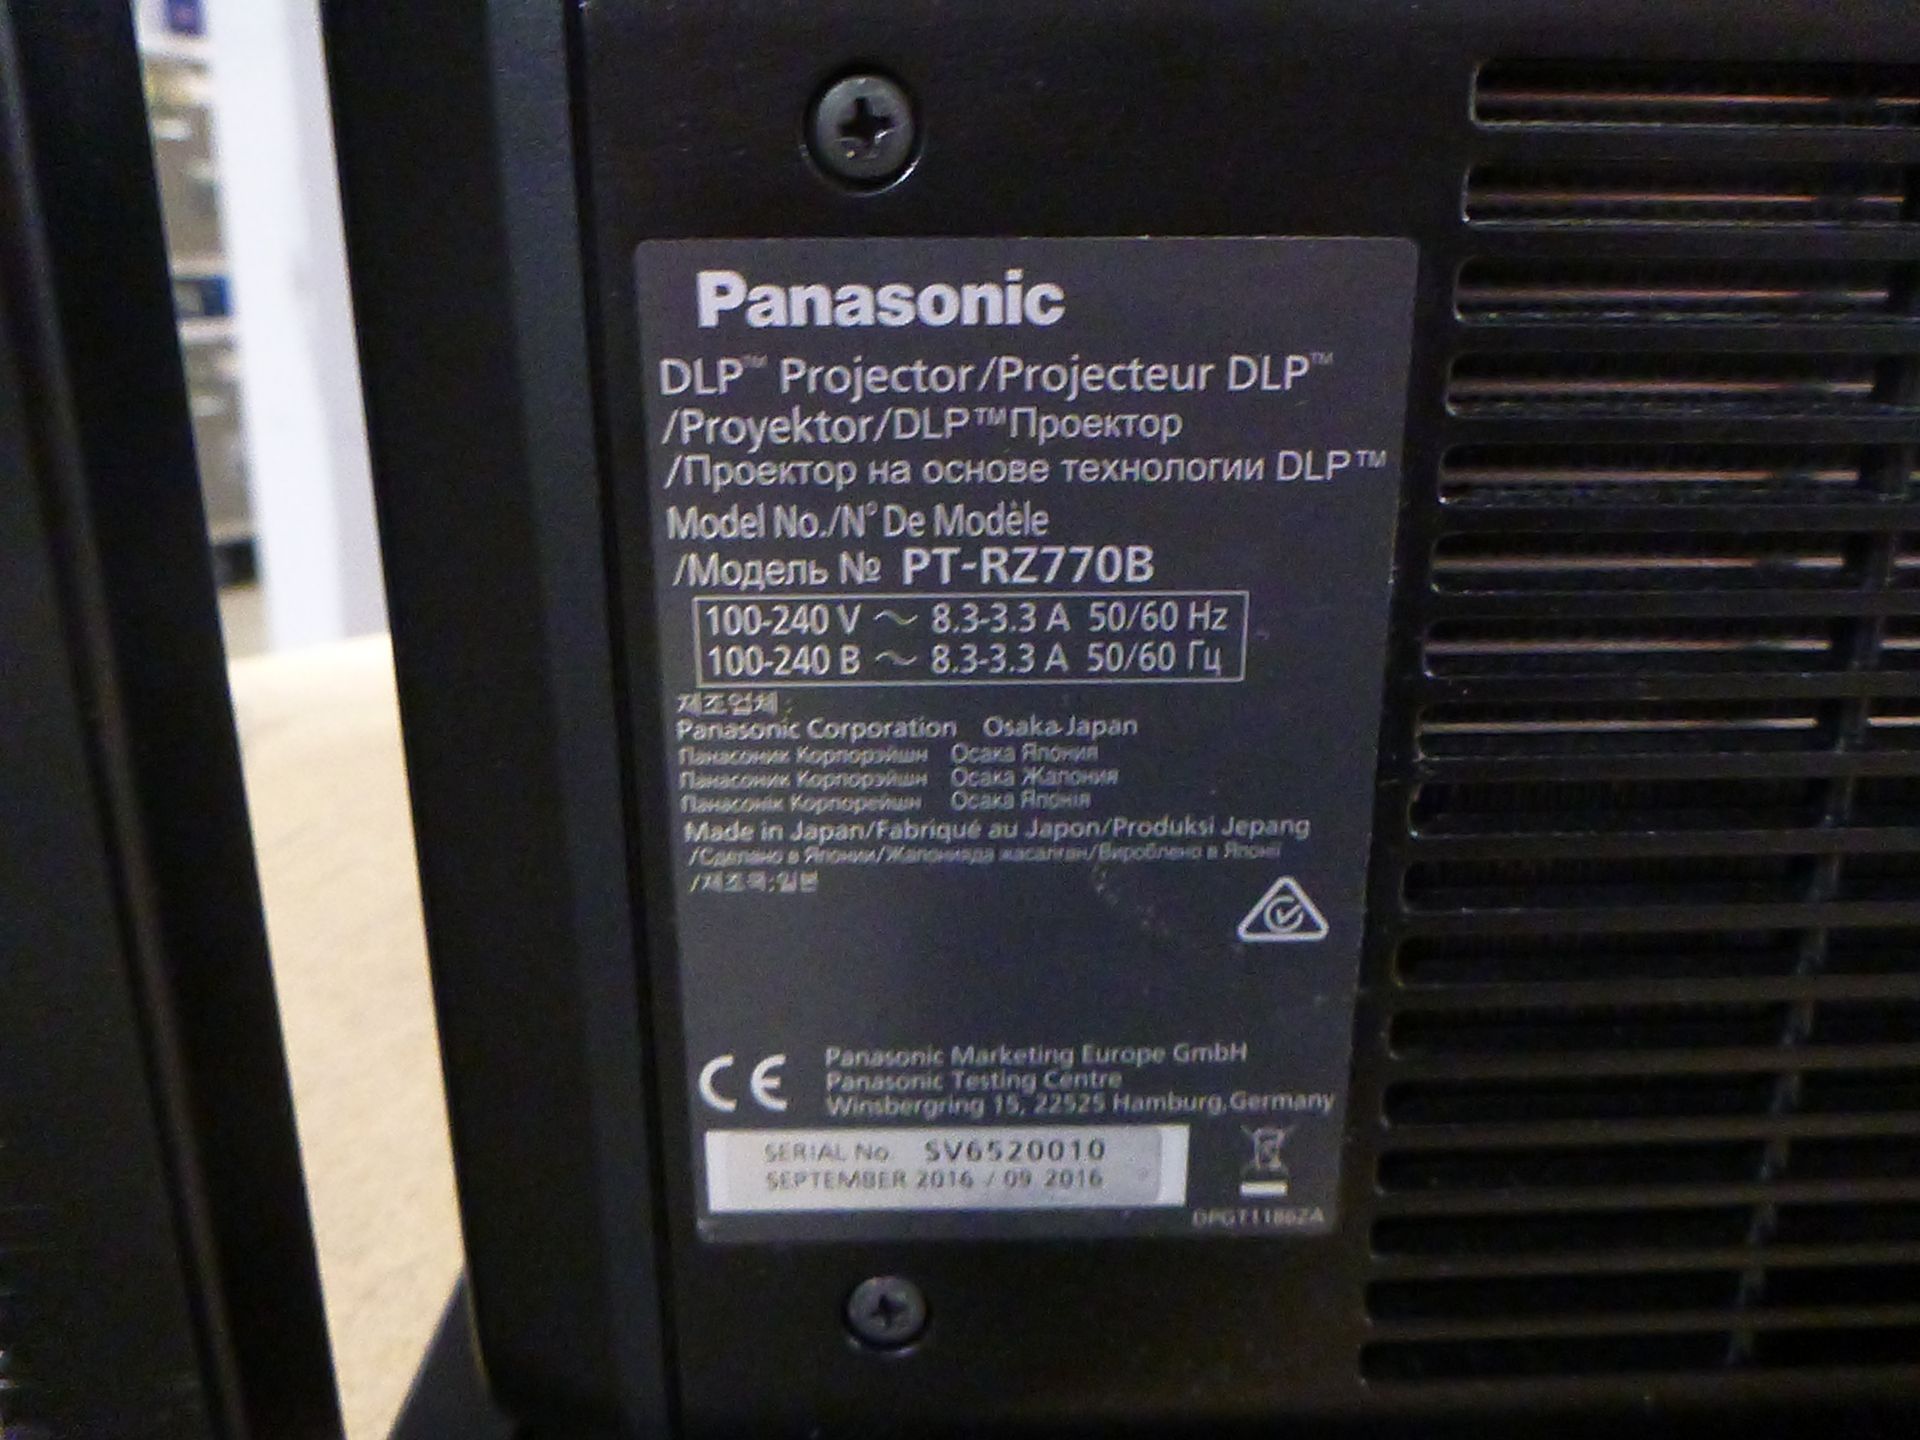 Panasonic Laser Projector, Model PT-RZ770, S/N SV6520010, YOM 2016, In flight case with standard 1. - Image 3 of 11